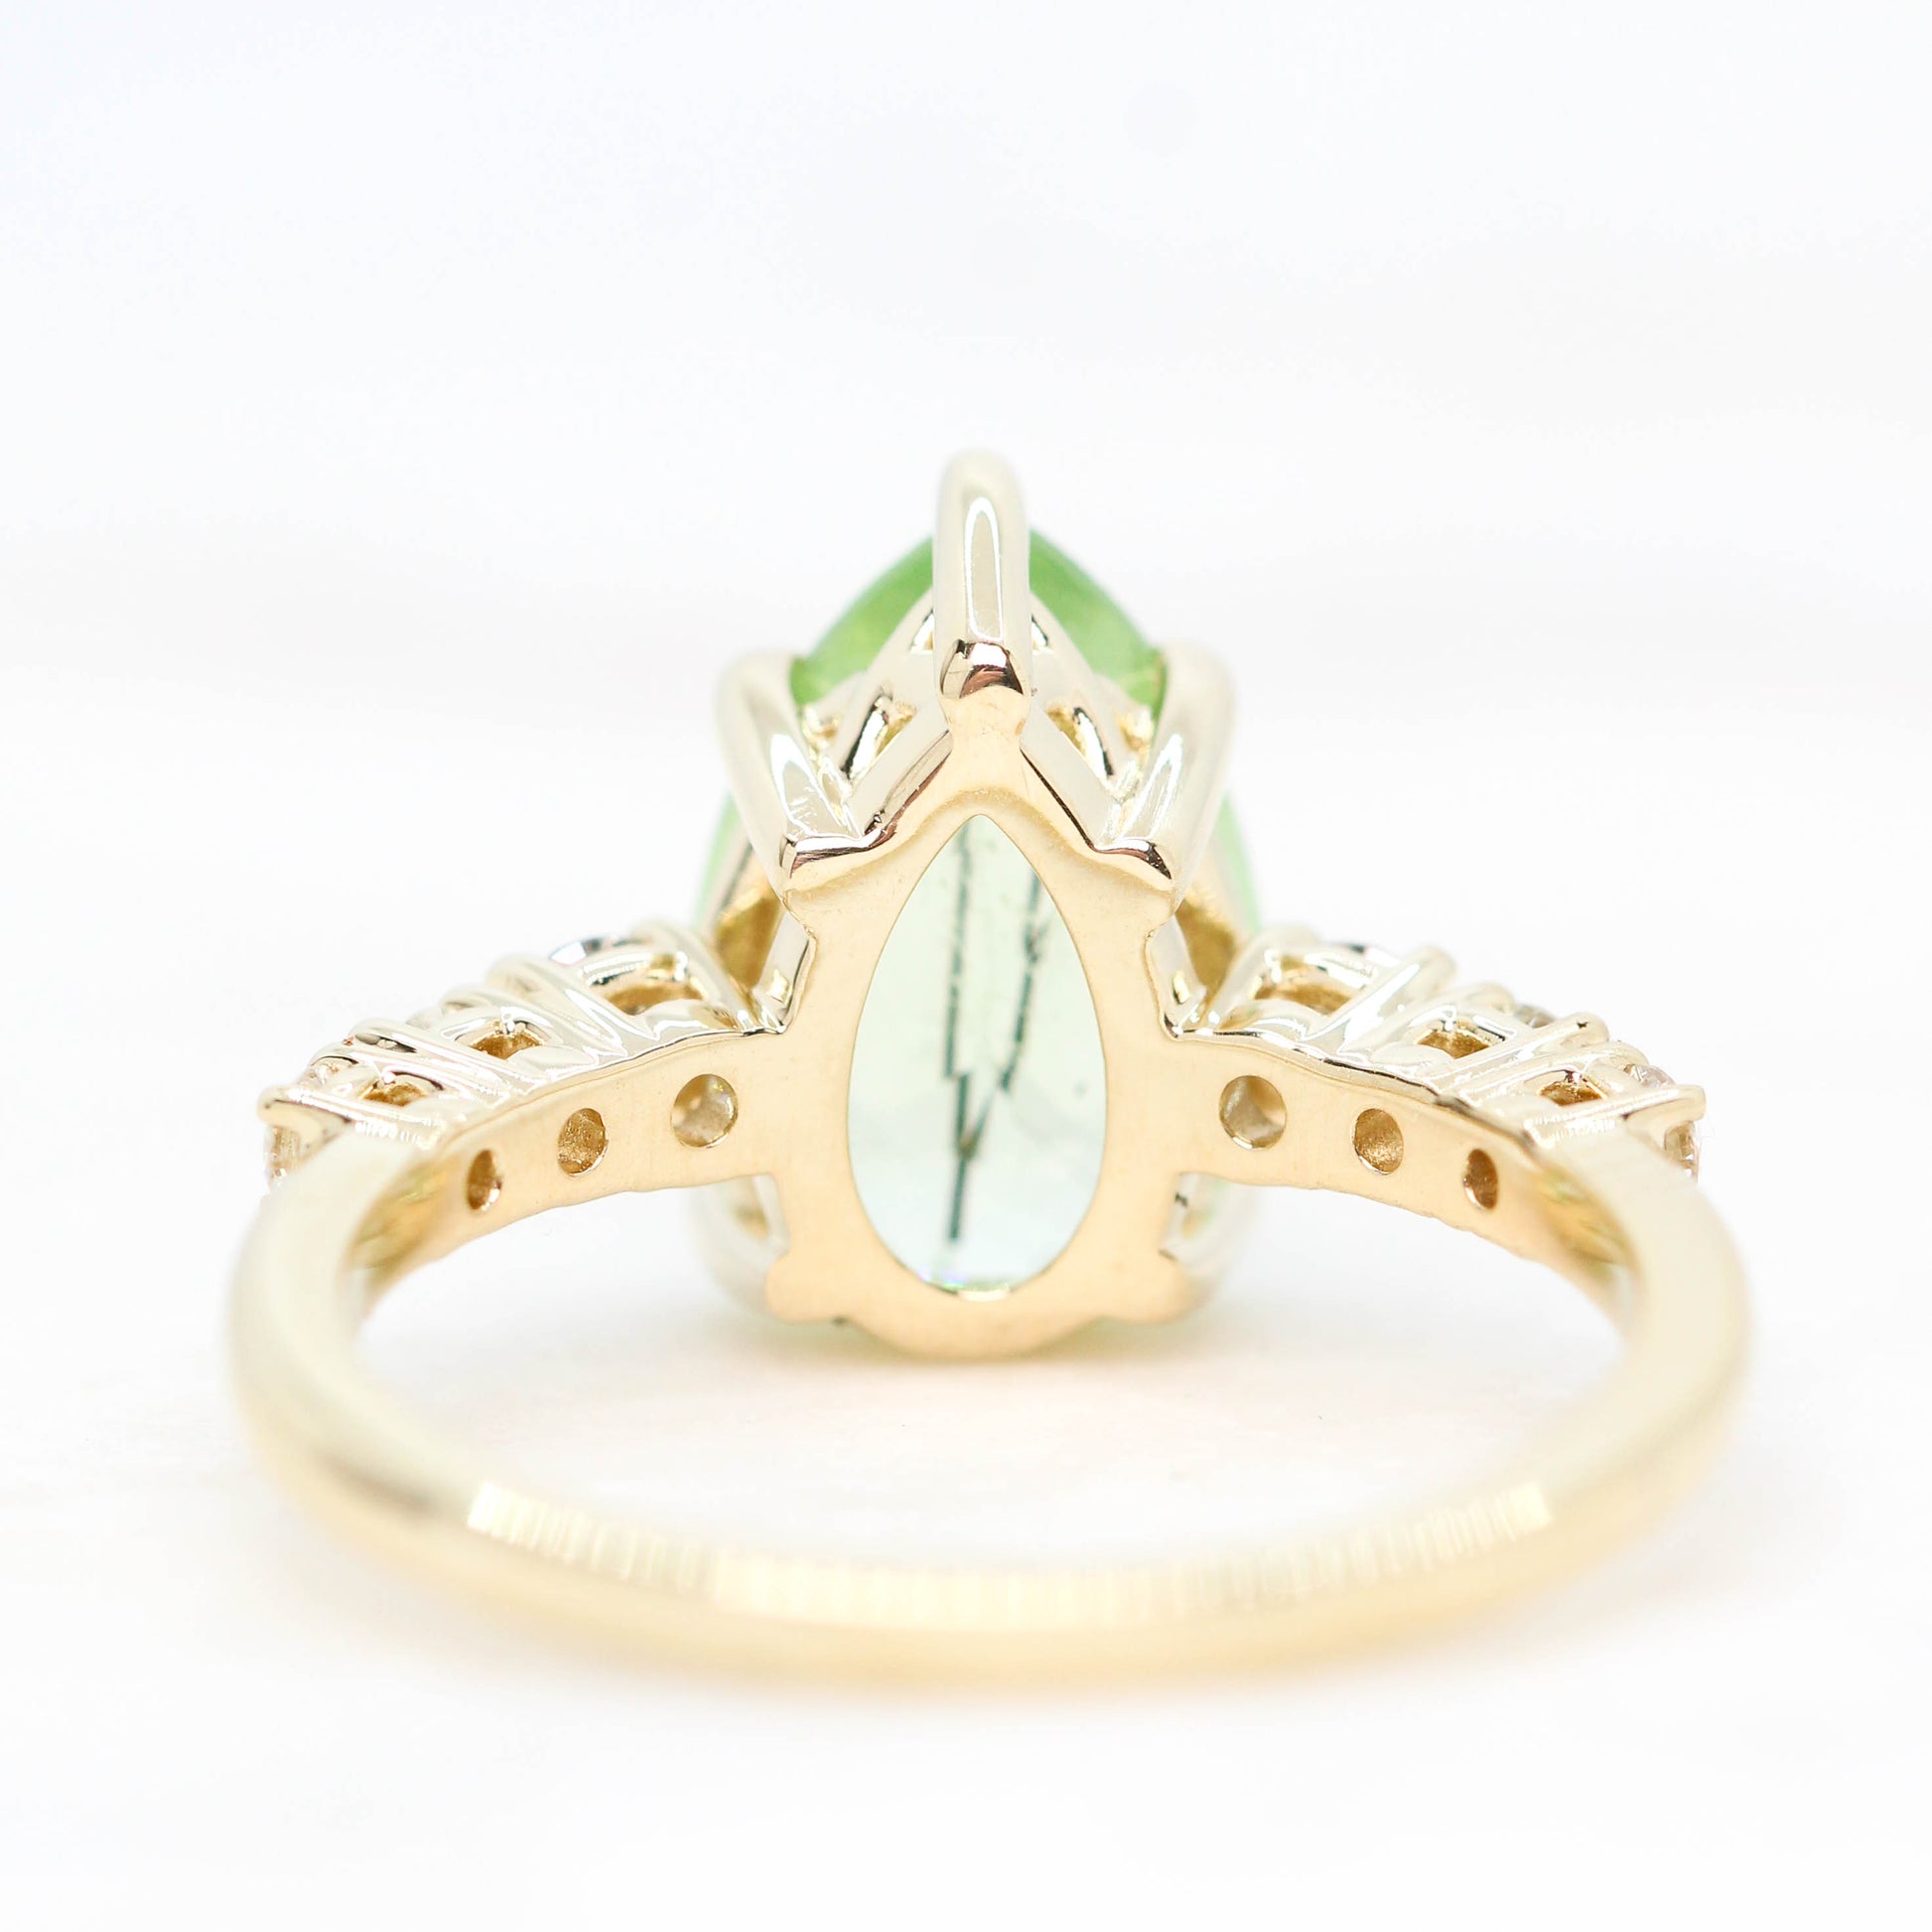 Tina Ring with a 2.58 Carat Light Green Pear Peridot and Gray and White Accent Diamonds in 14k Yellow Gold - Ready to Size and Ship - Midwinter Co. Alternative Bridal Rings and Modern Fine Jewelry